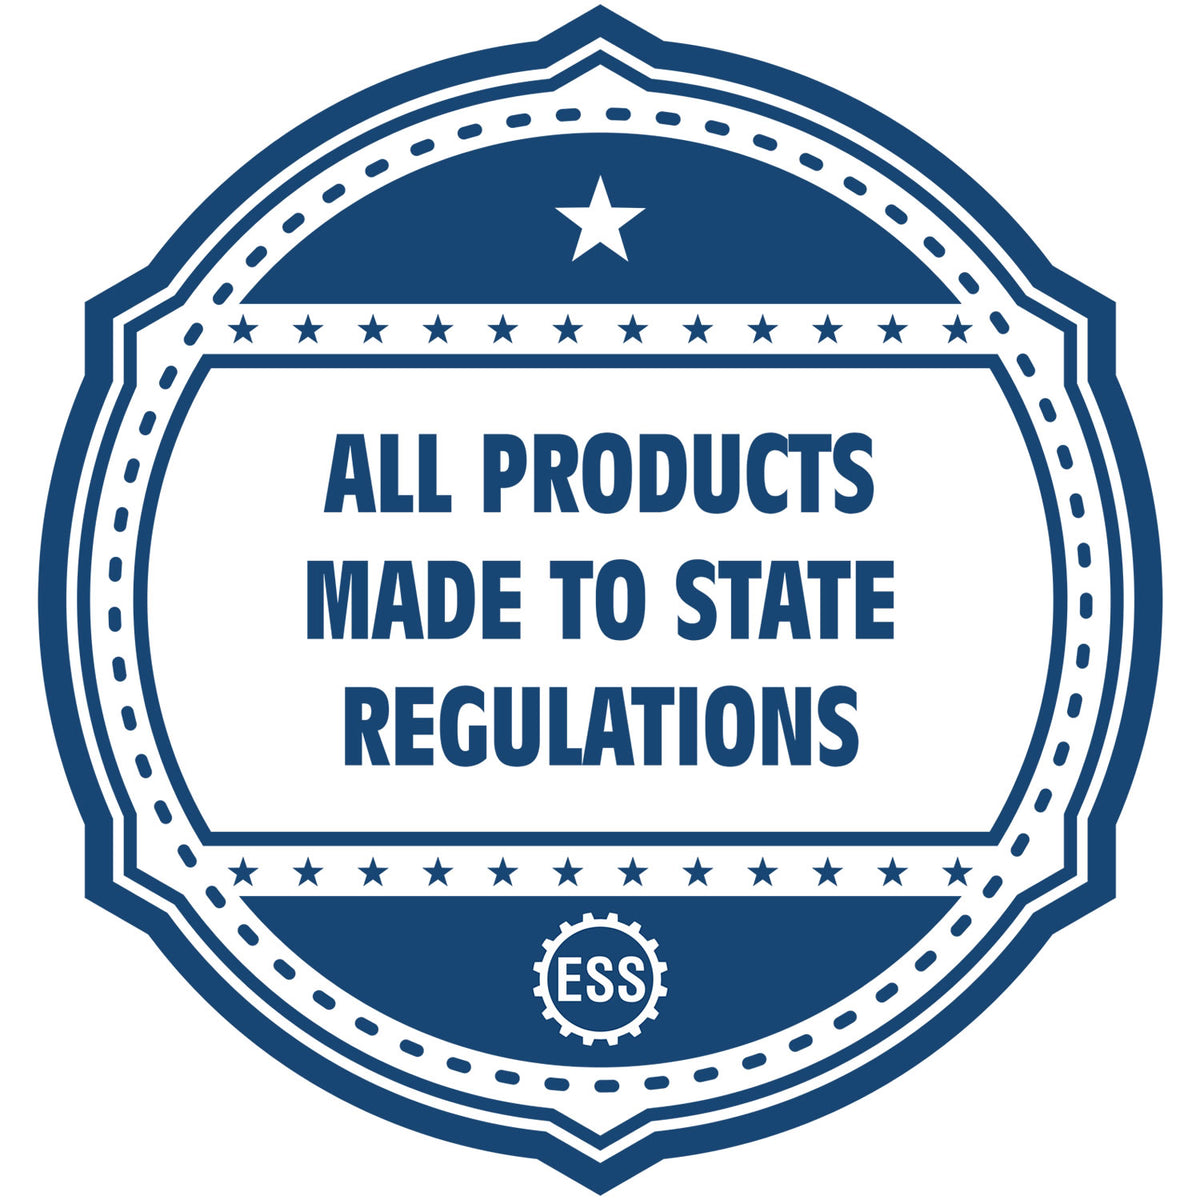 An icon or badge element for the Long Reach Michigan PE Seal showing that this product is made in compliance with state regulations.